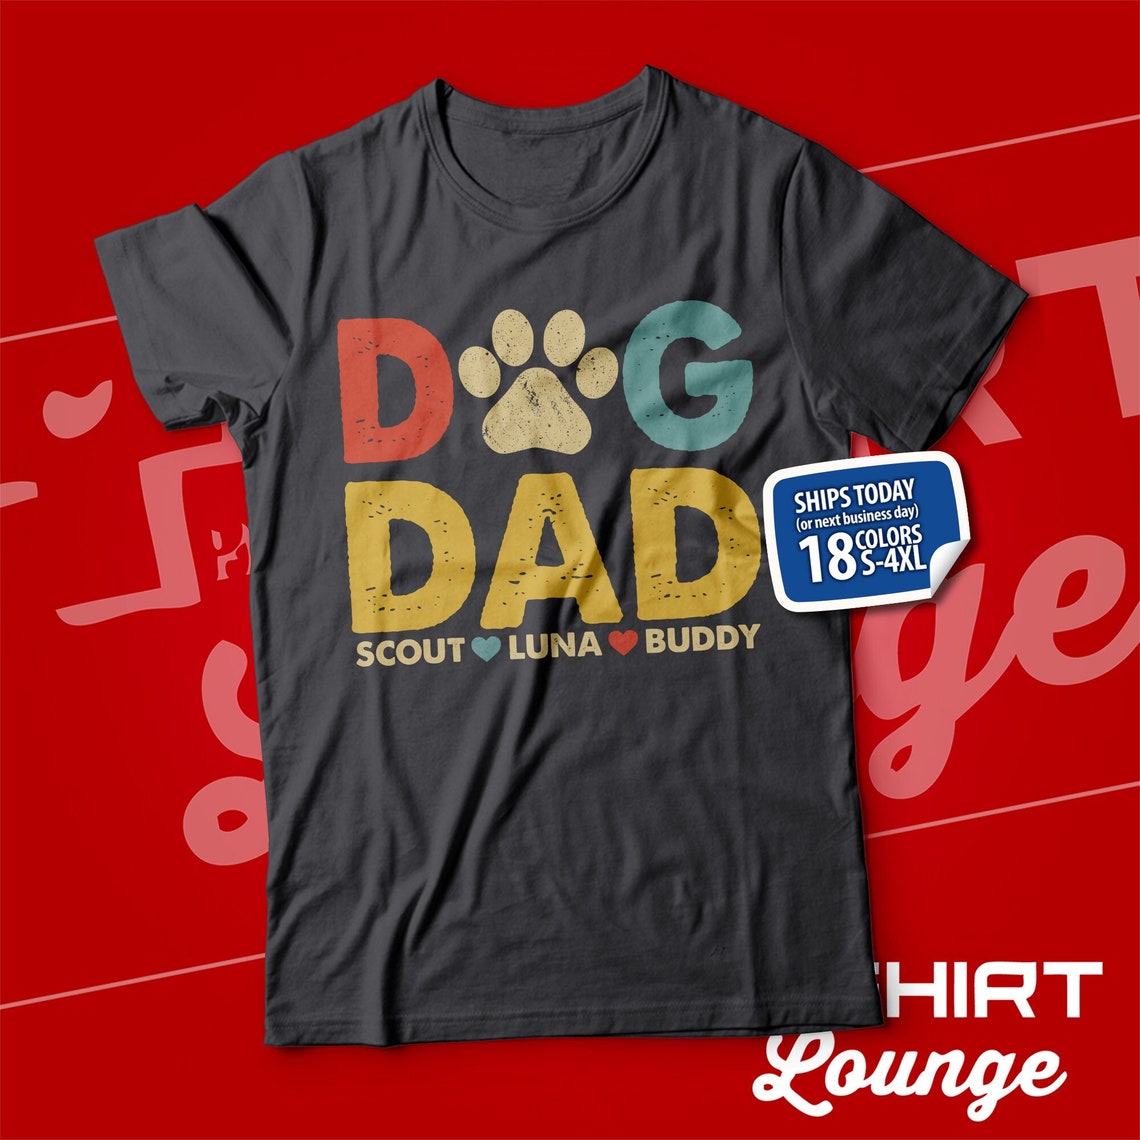 Personalized Dog Dad Shirt With Dog Names